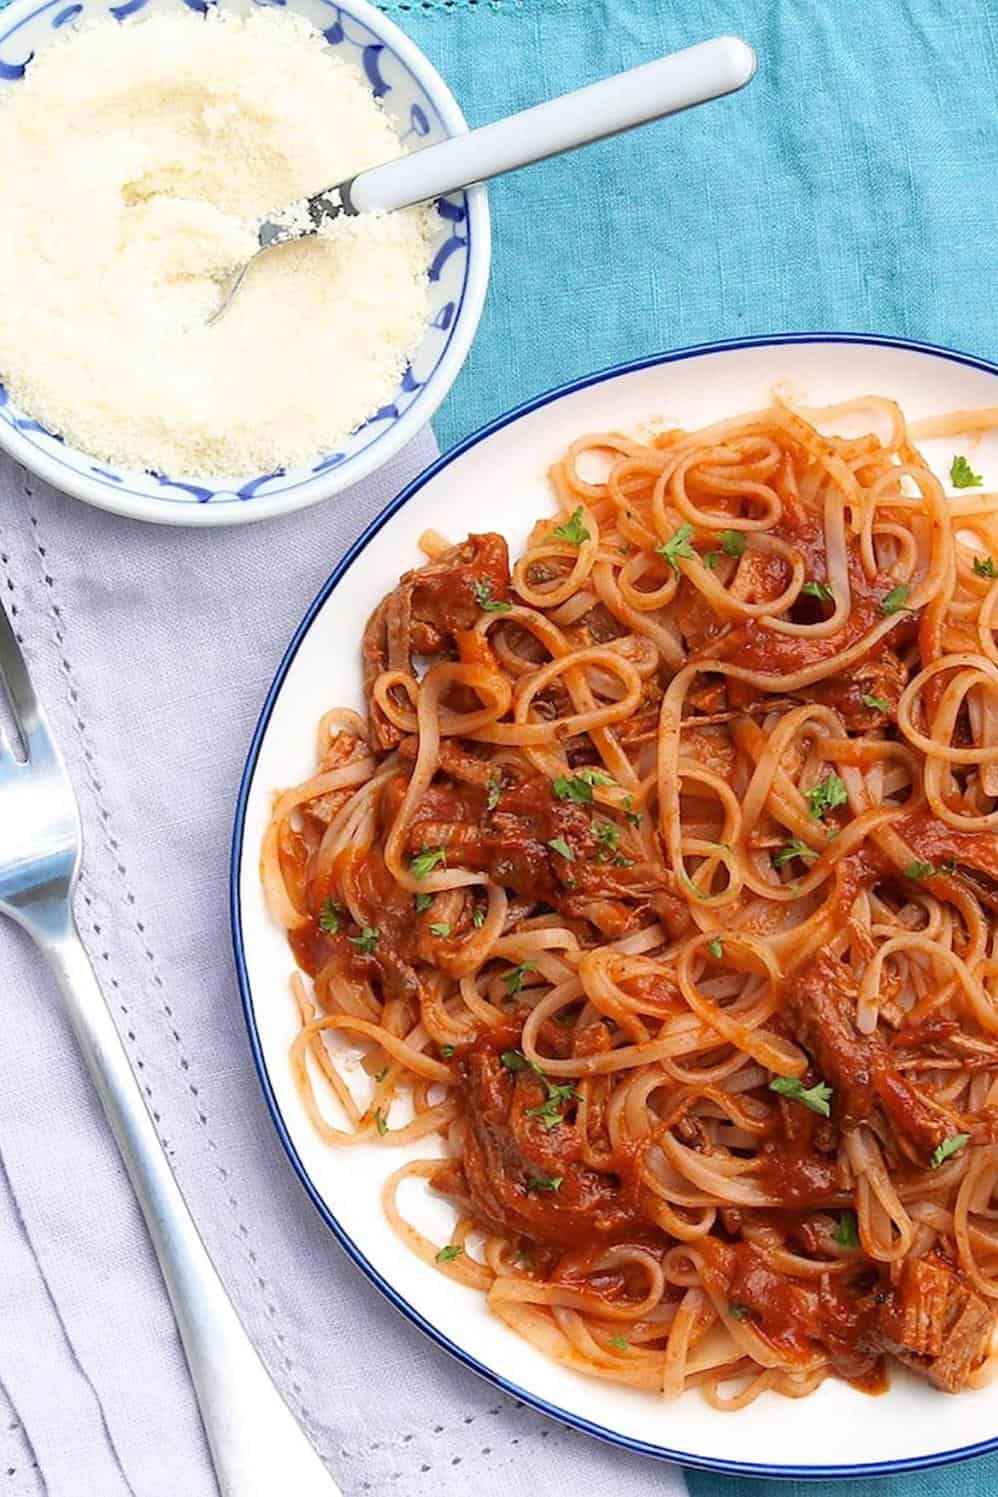  Treat yourself to a plate of Swiss steak and spaghetti goodness